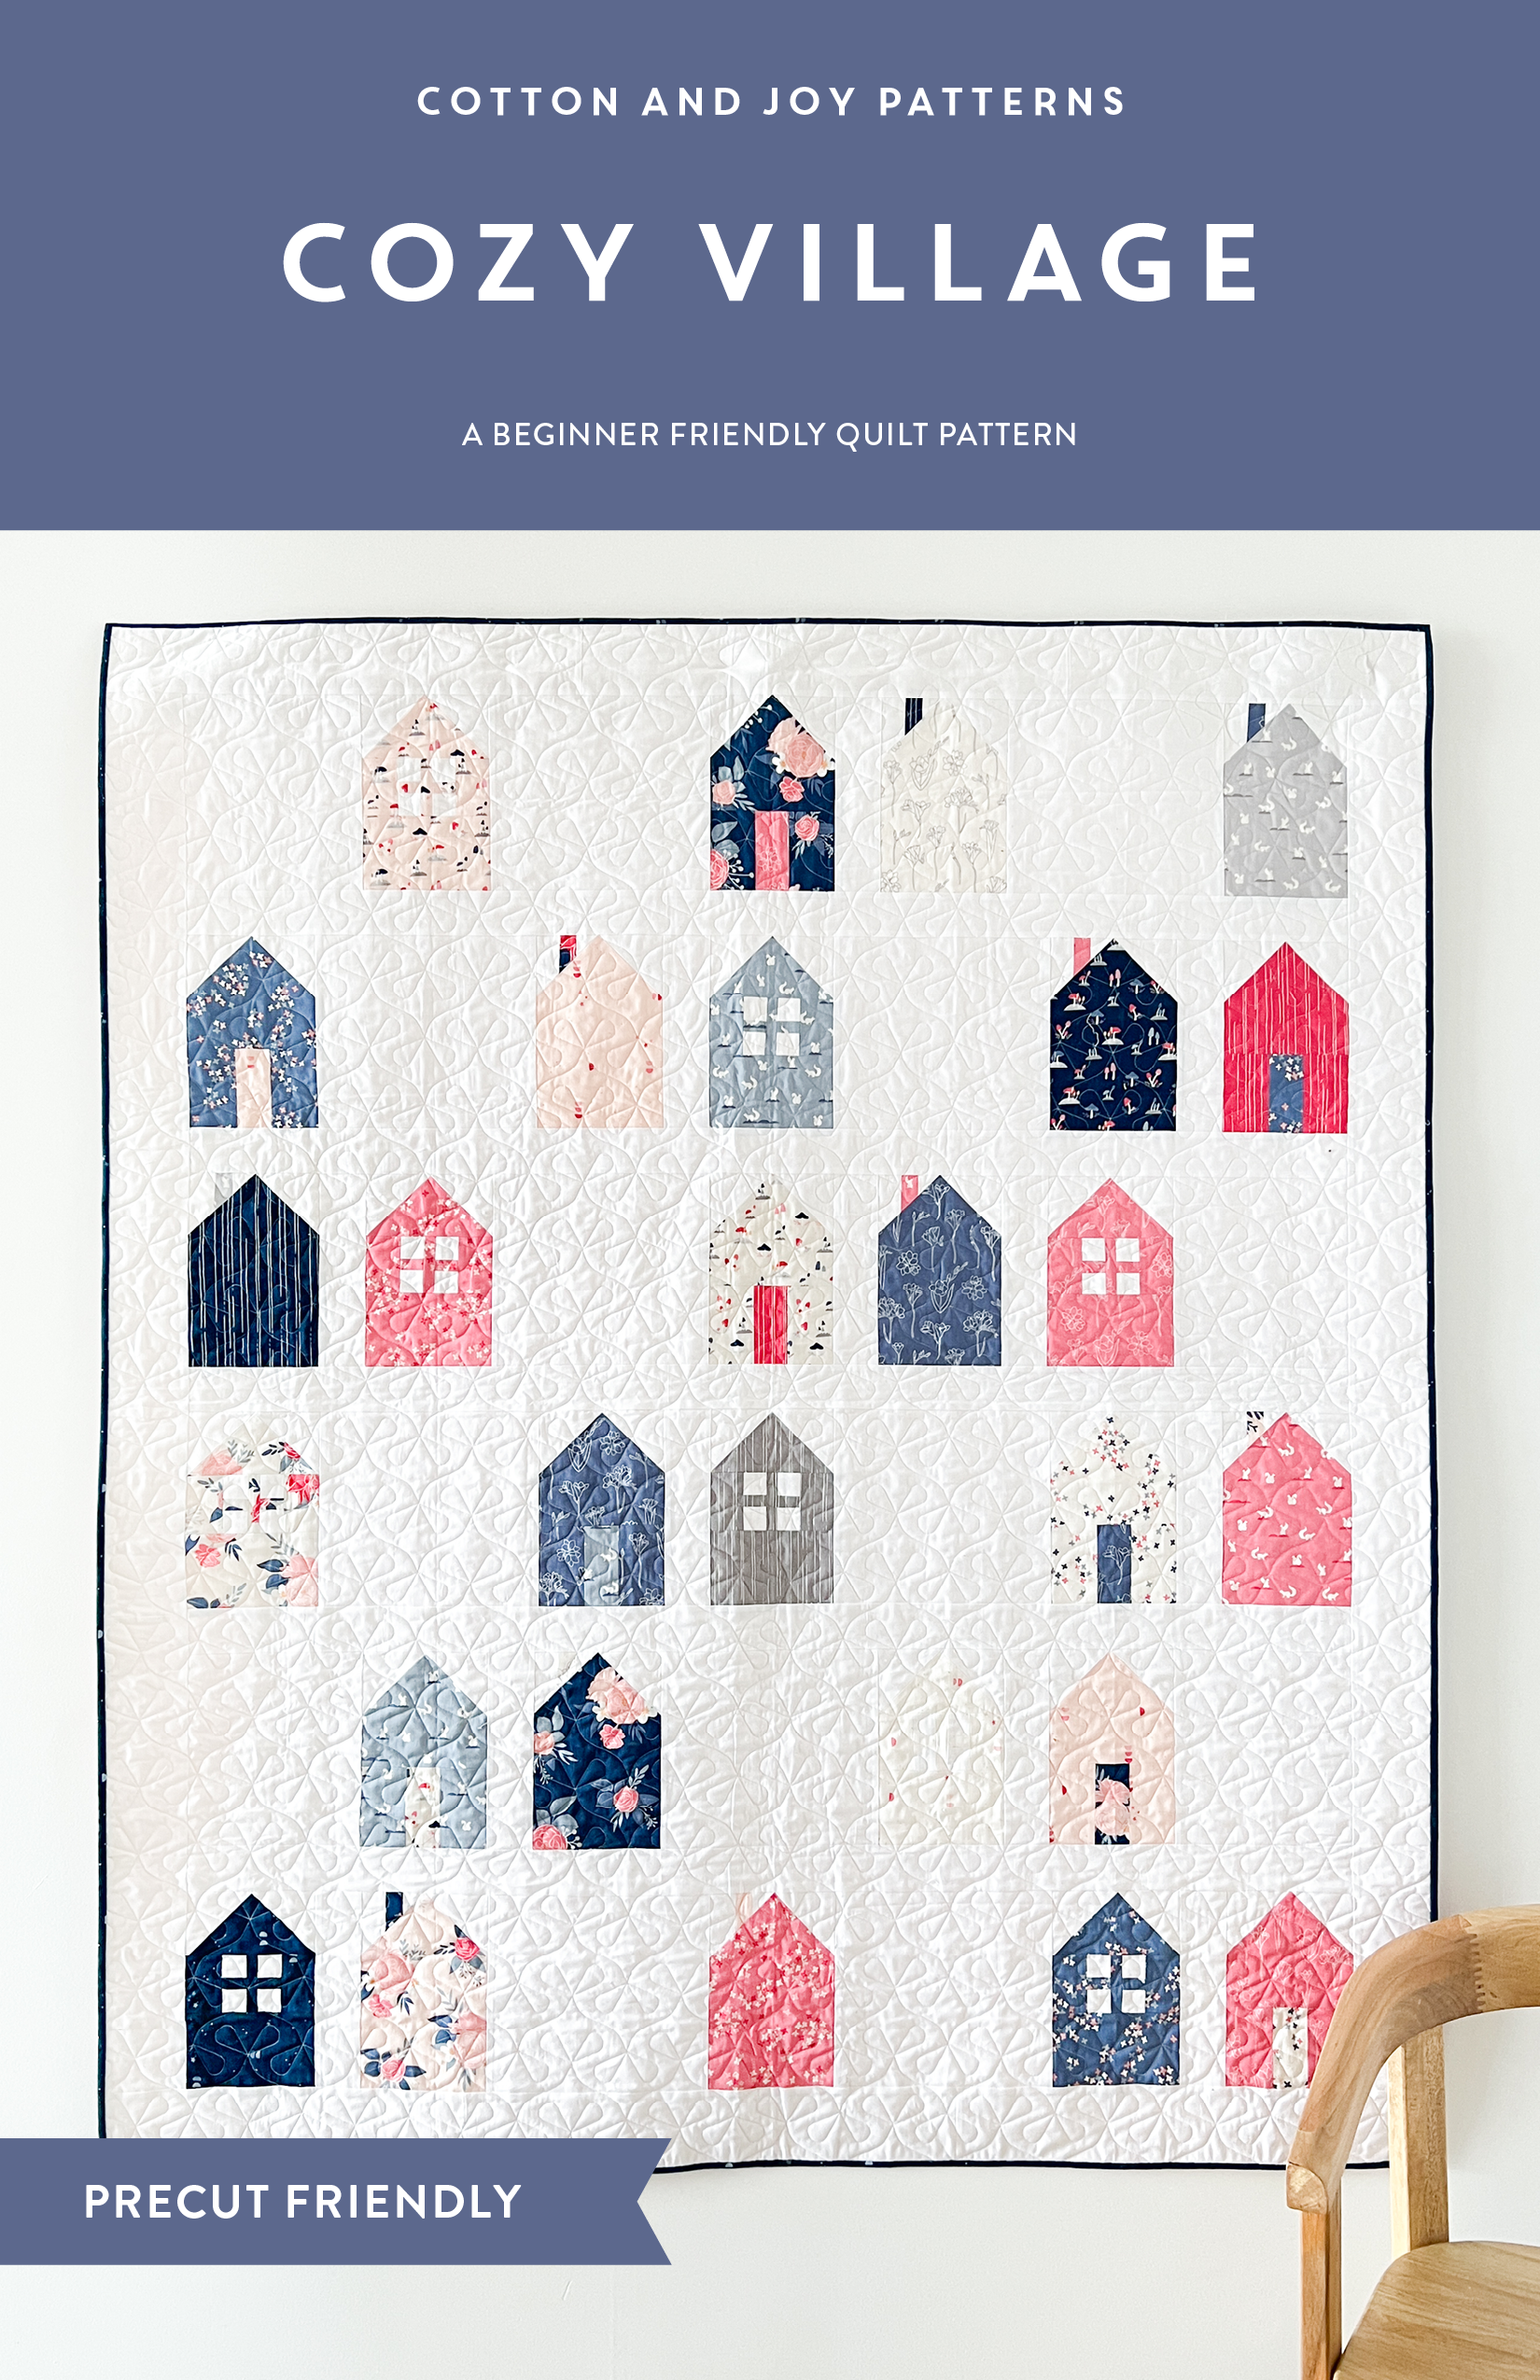 Cozy Village Quilt Pattern by Cotton and Joy - Sewfinity.com